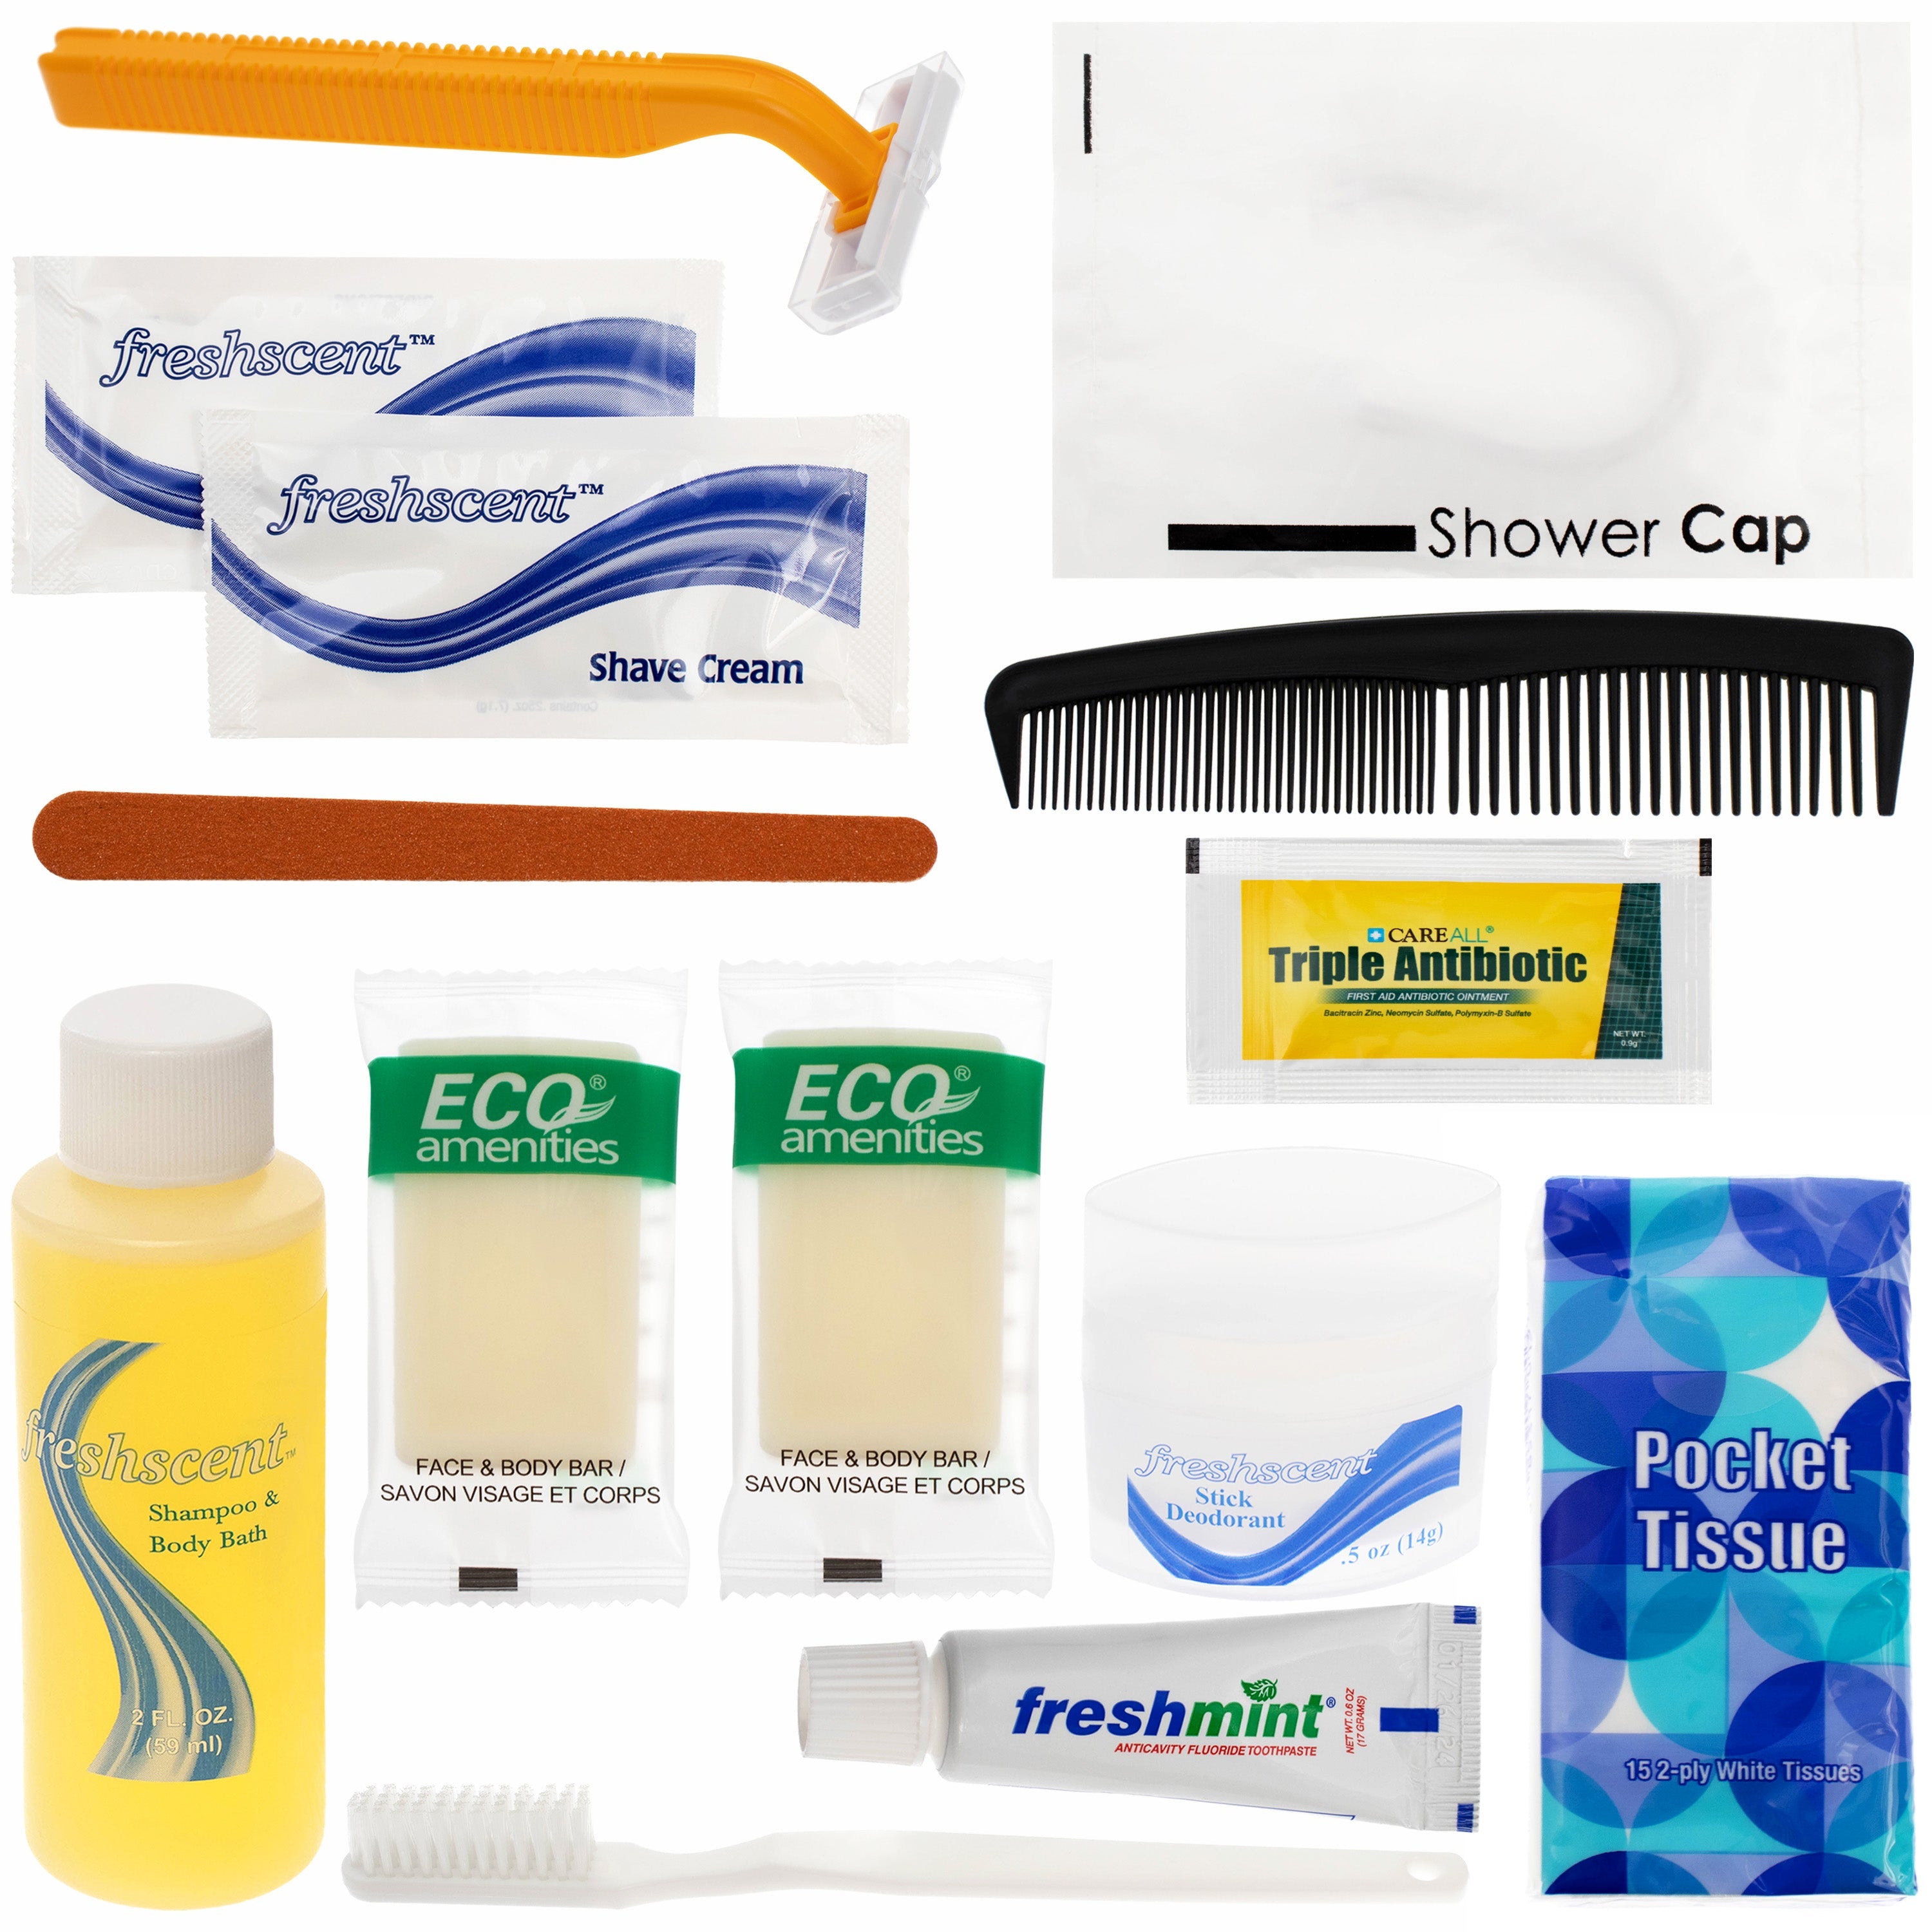 Bulk Travel Size Toiletries in New York Archives - B2B Online Shop in NYC